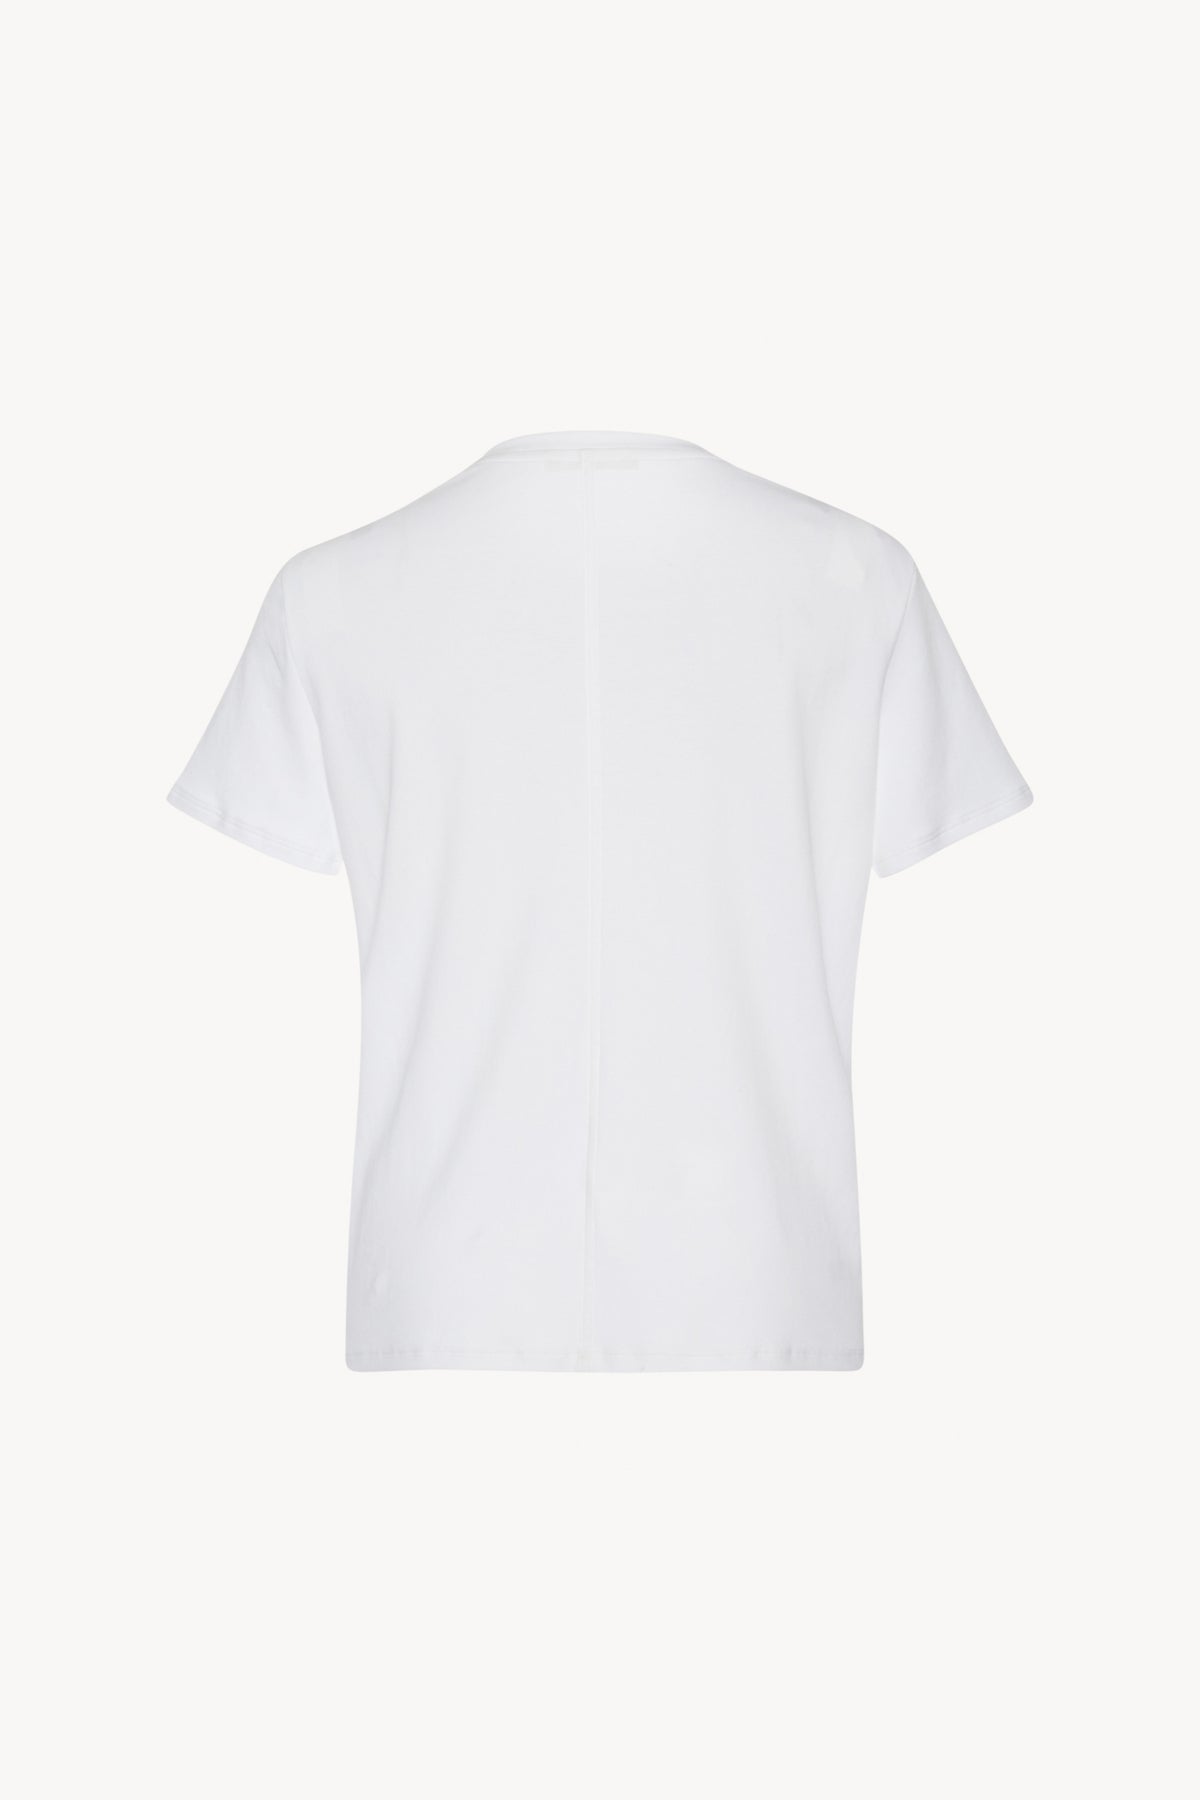 Wesler Top White in Cotton – The Row